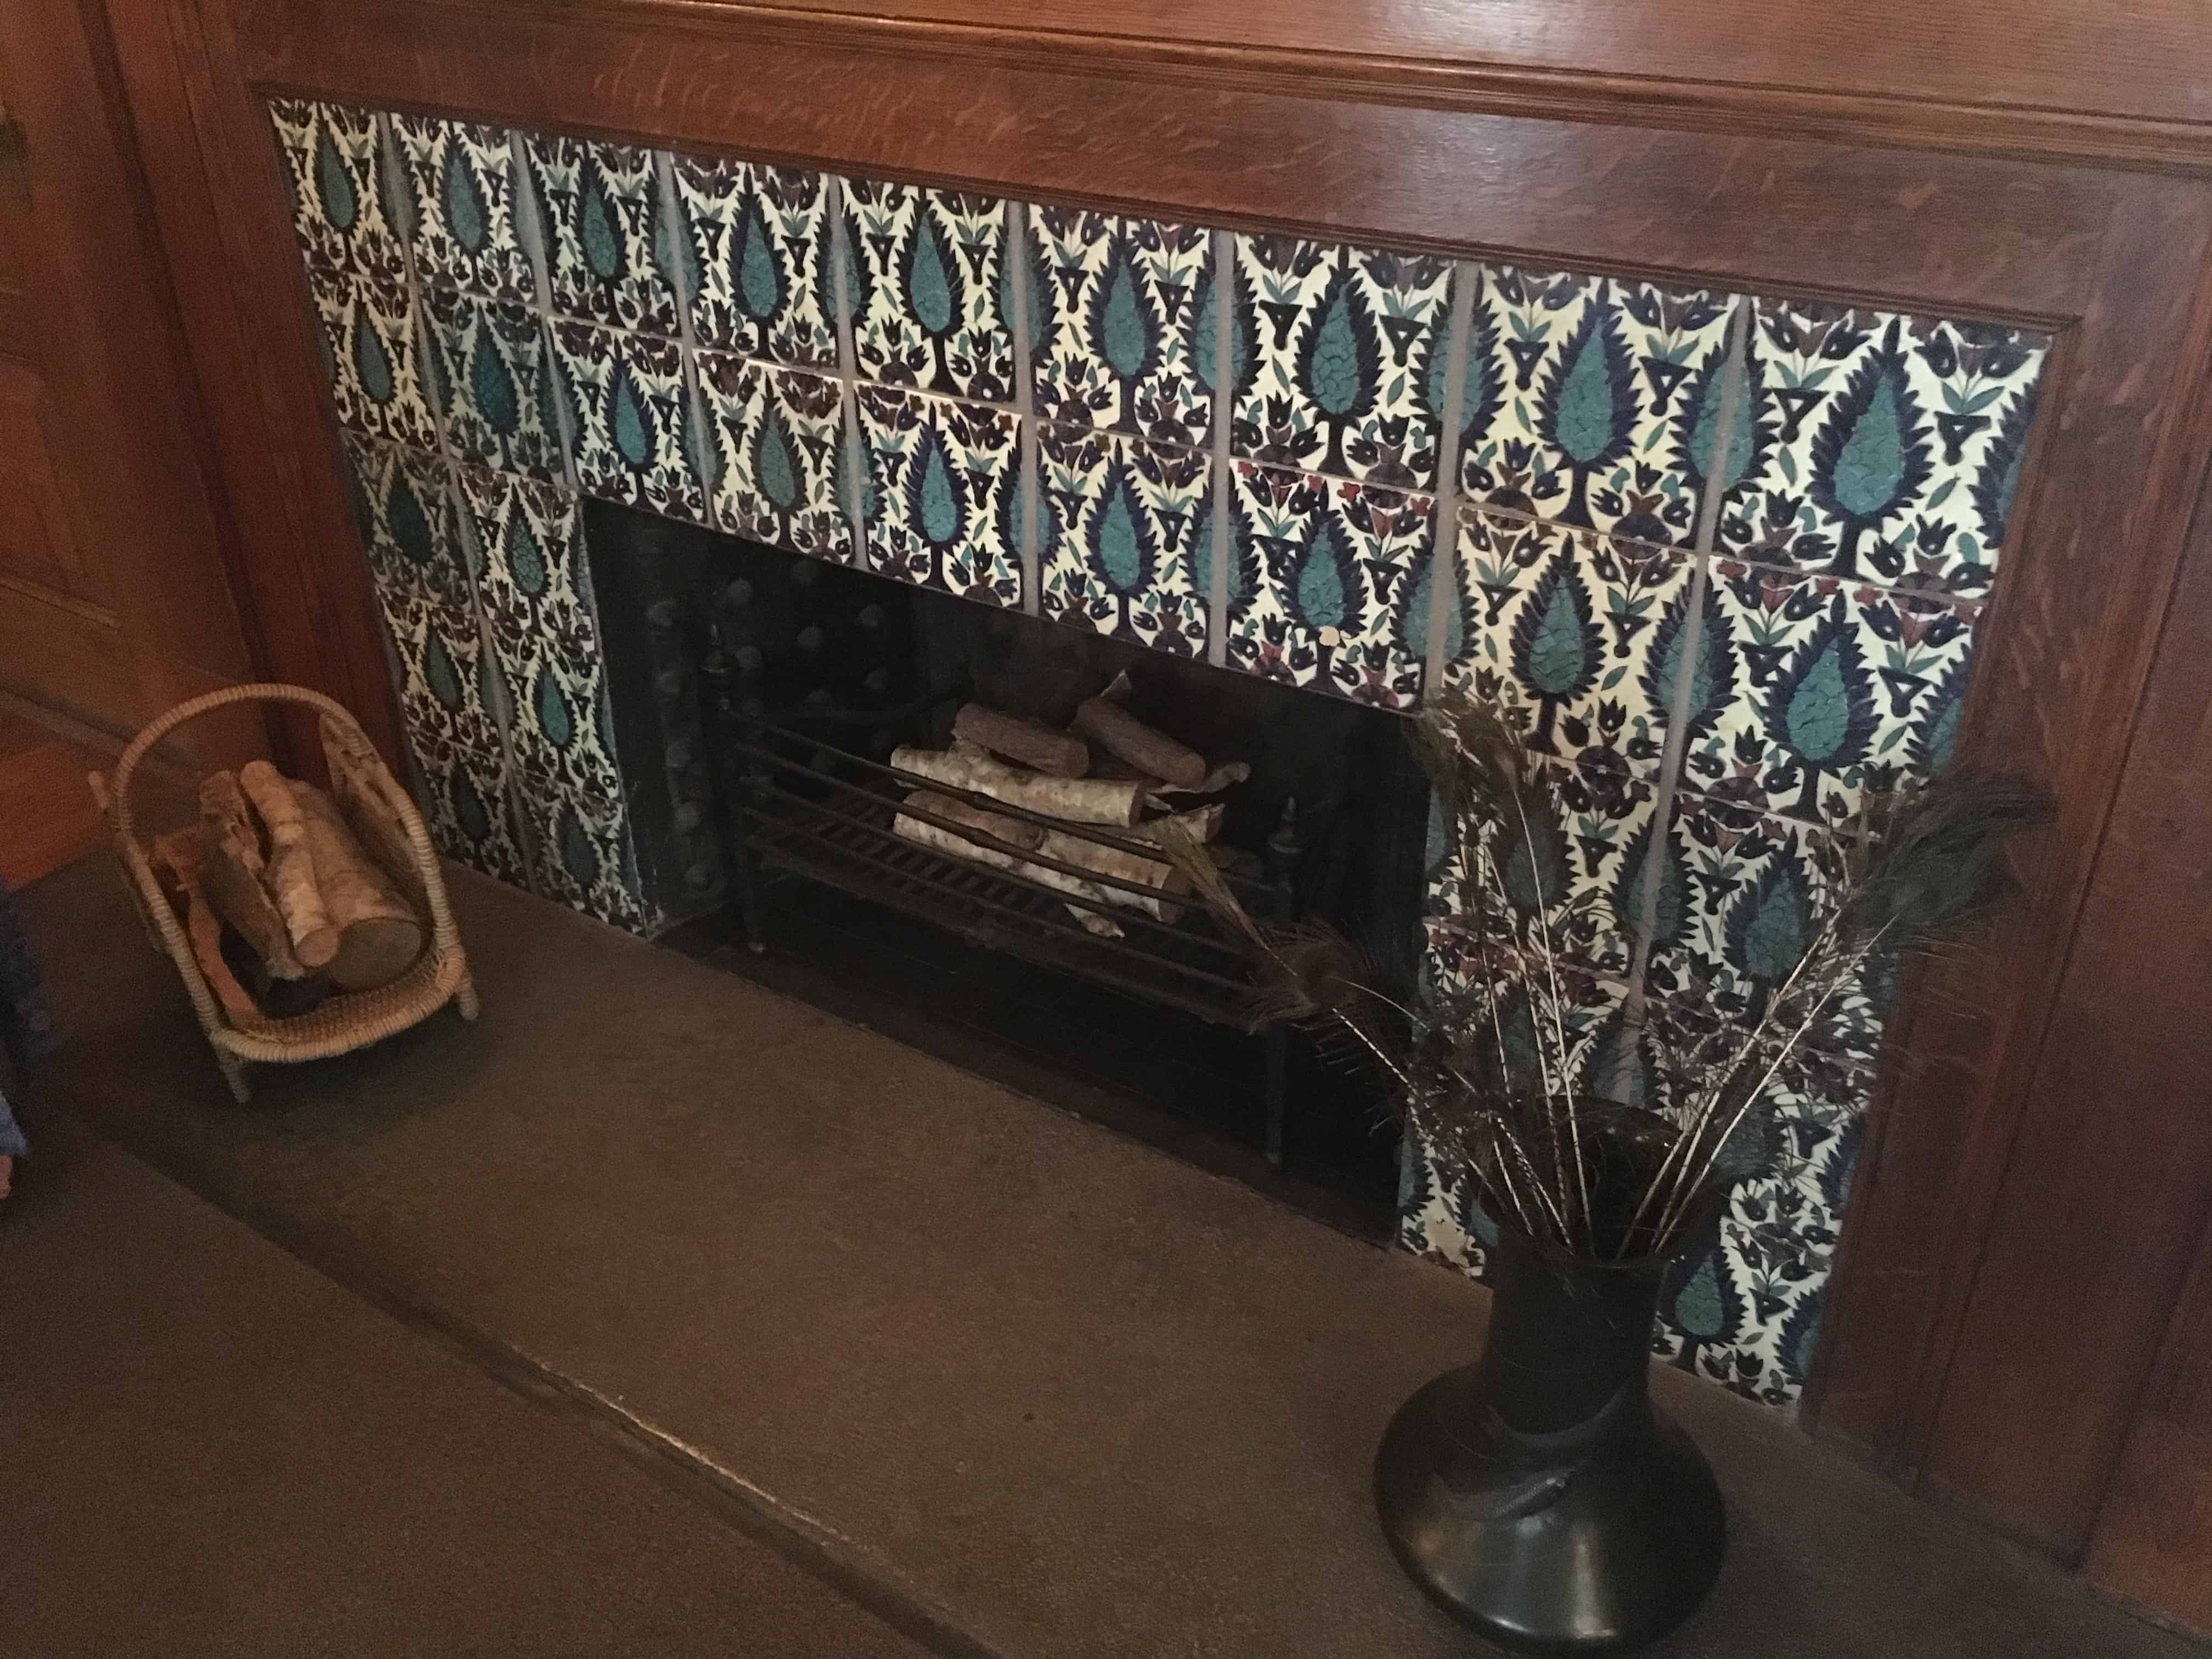 Dining room fireplace at the John J. Glessner House in Chicago, Illinois